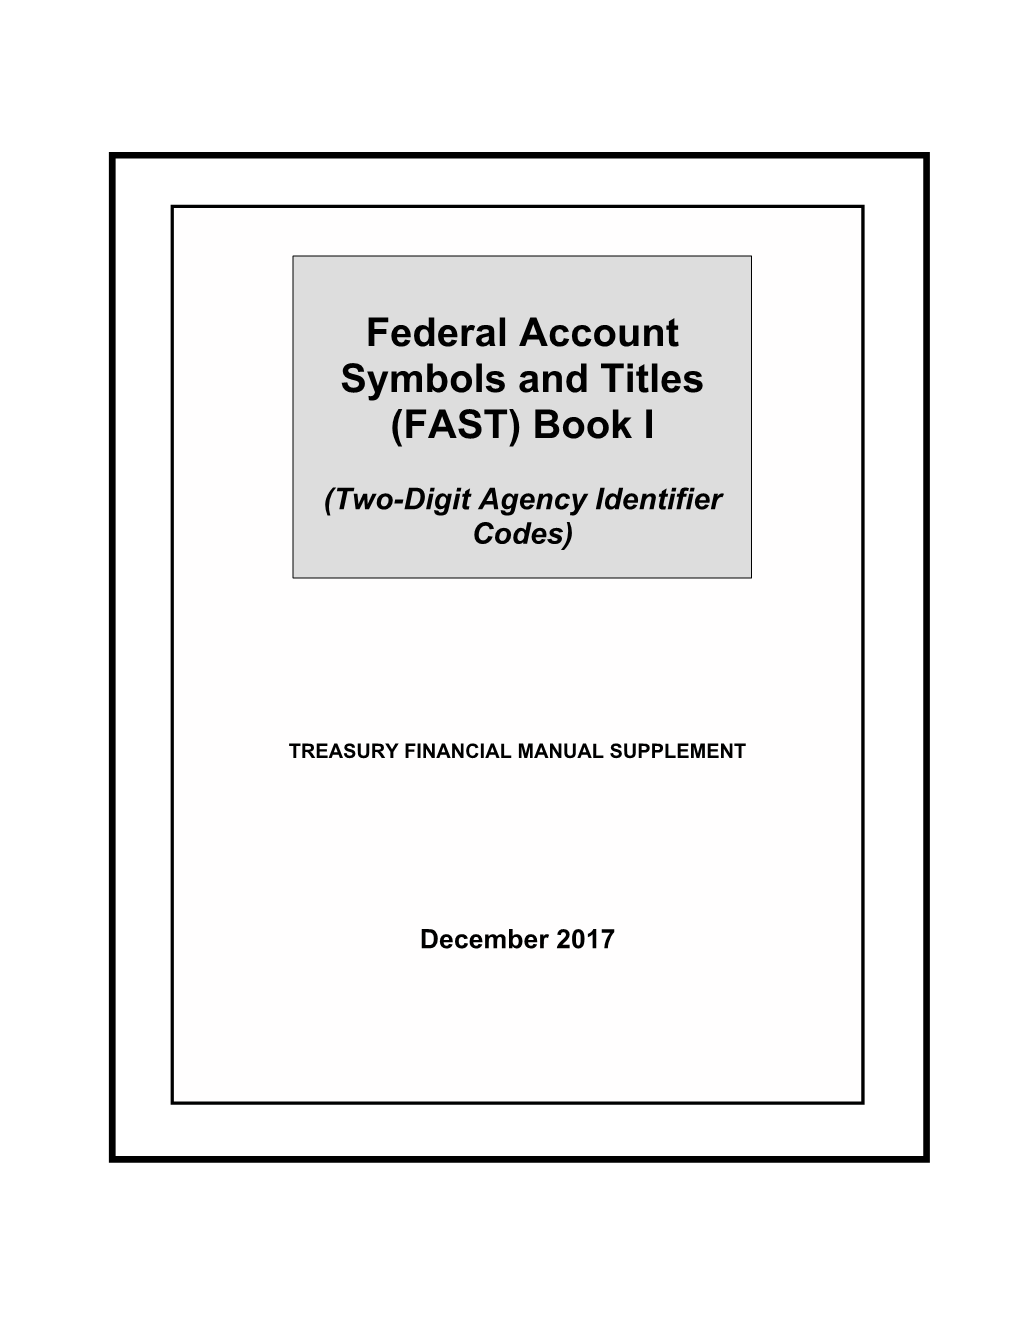 FEDERAL ACCOUNT SYMBOLS and TITLES (FAST) BOOK I (Two-Digit Agency Identifier Codes)